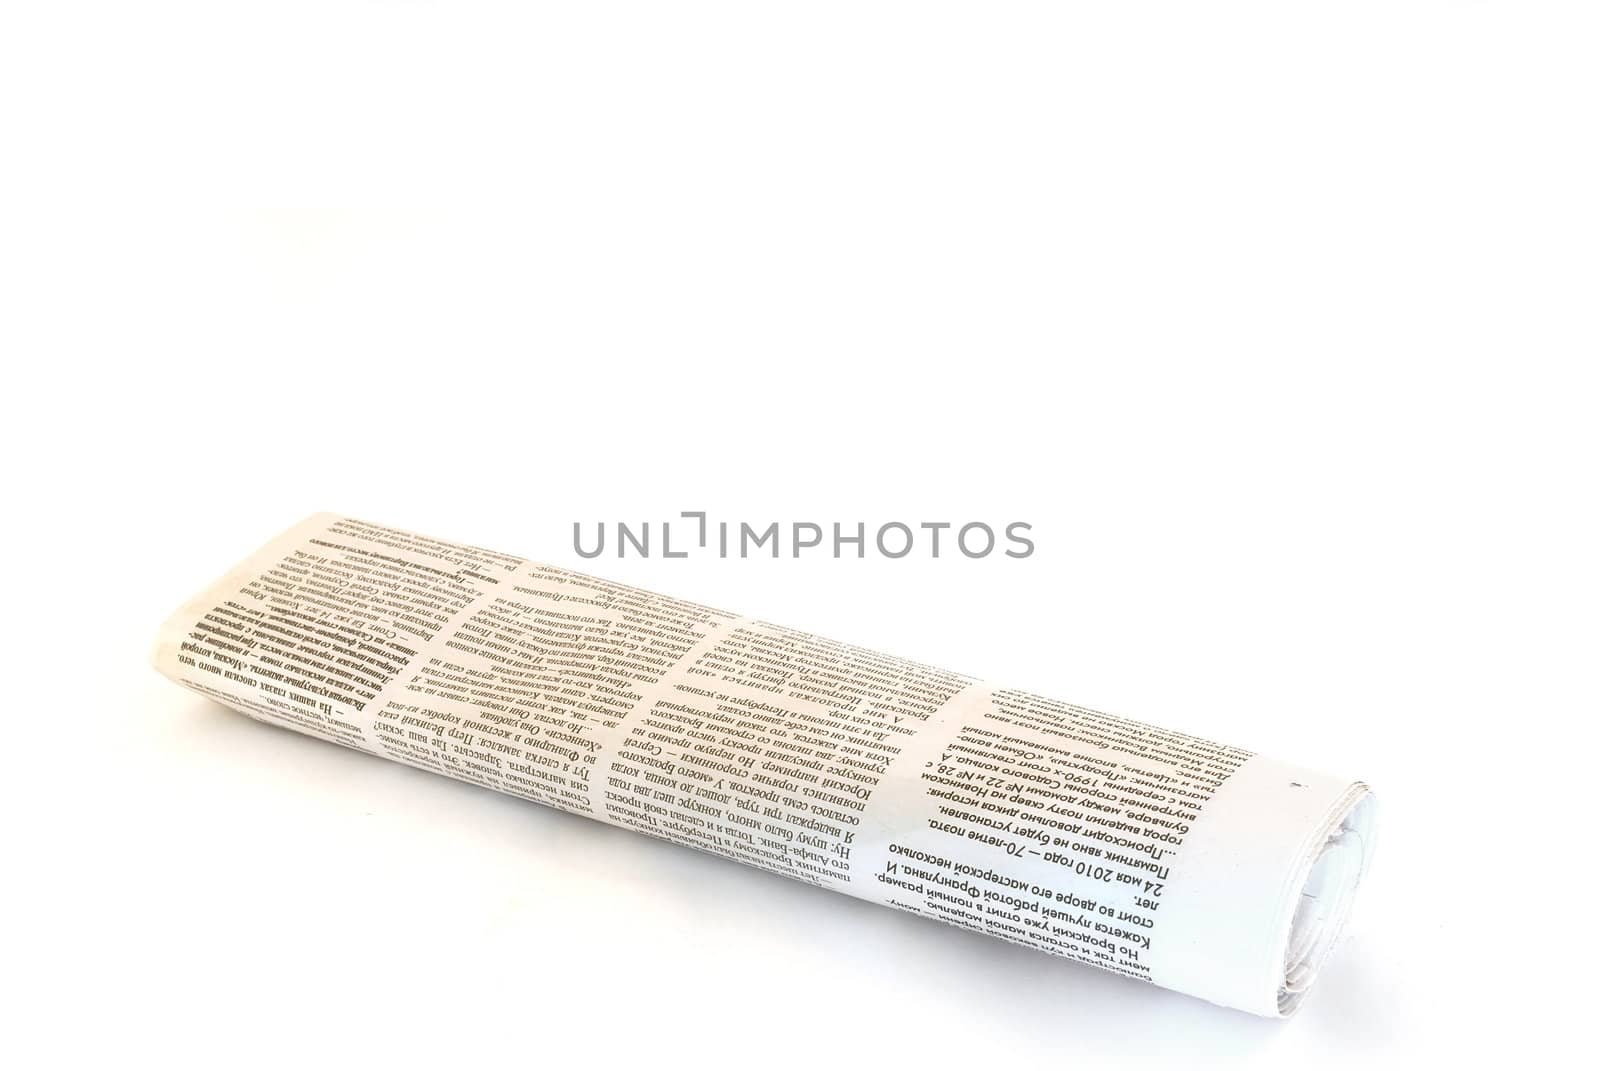 rolled up newspaper by Diversphoto